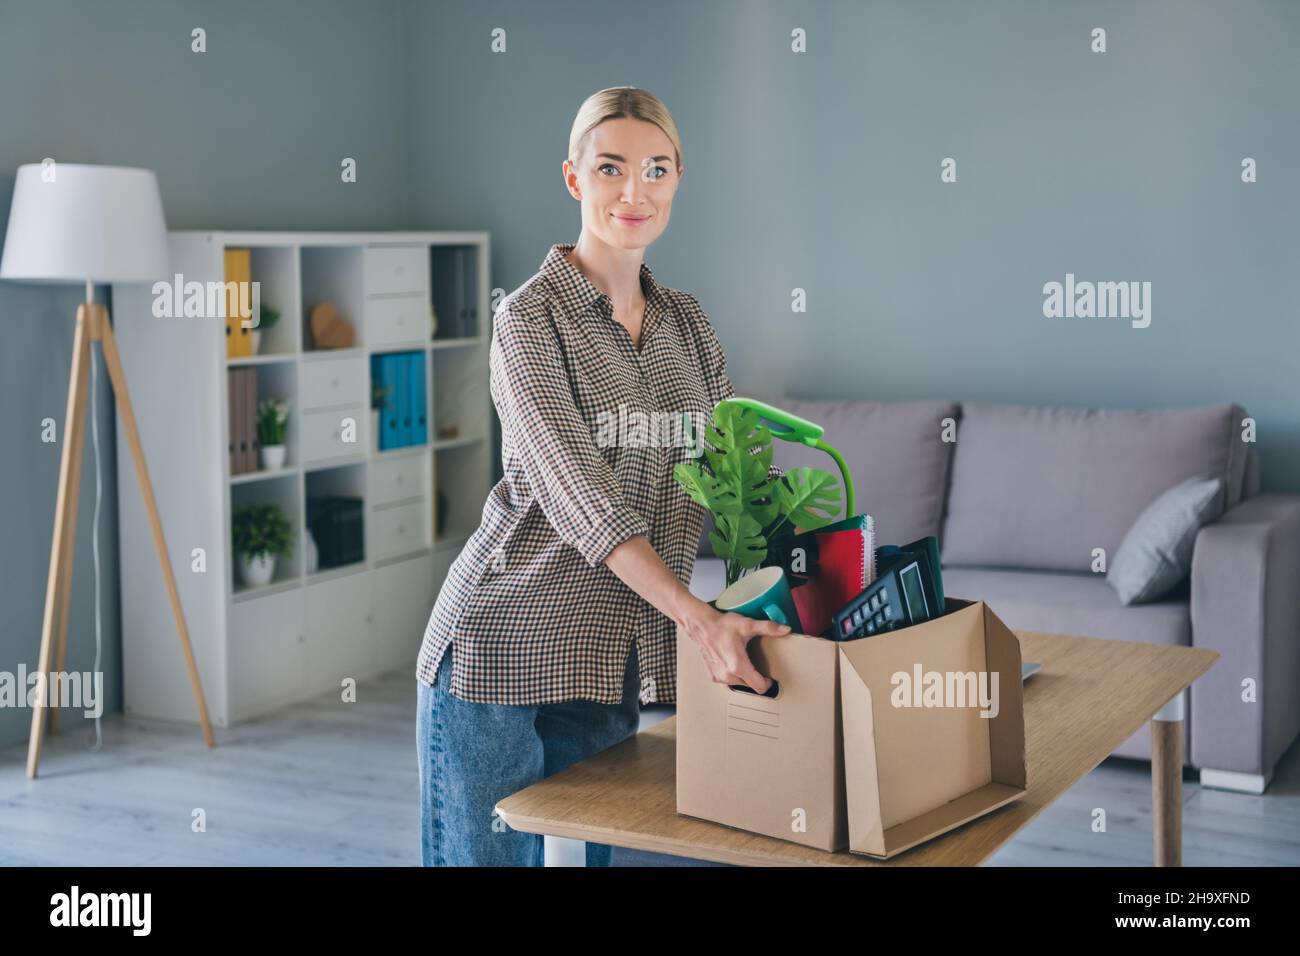 Photo of marketer agent executive lady fired hold carton box office belongings move modern workspace Stock Photo